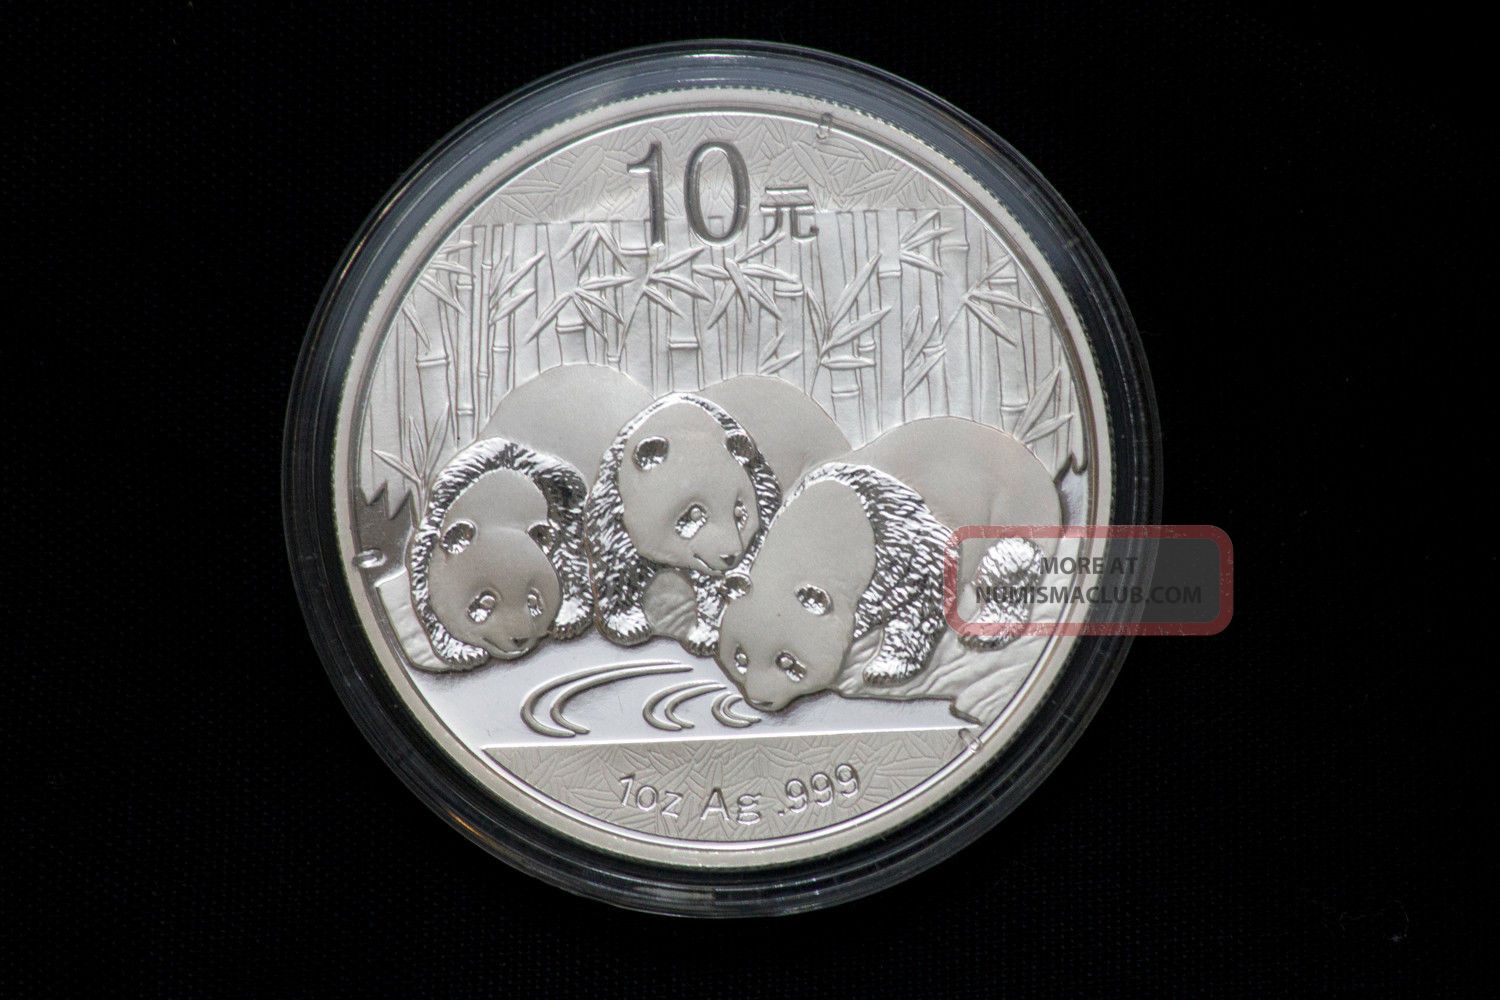 2013 1 Oz Silver Chinese Panda Coin In Capsule